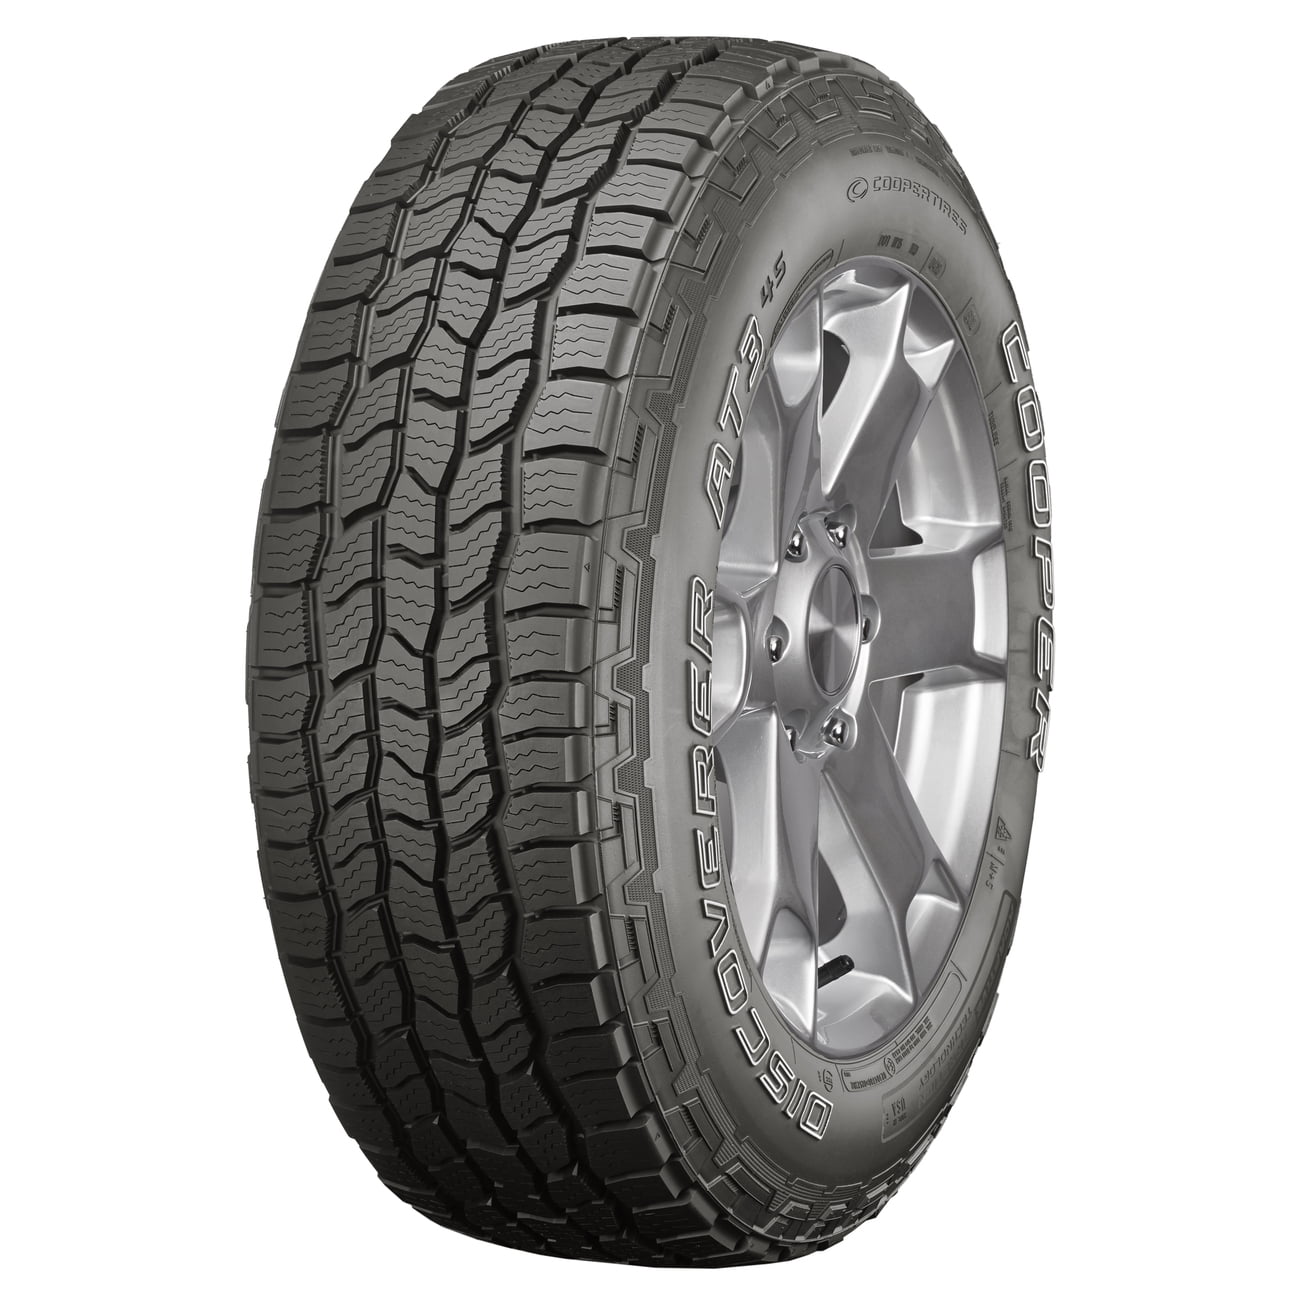 All-weather tyre 265/60 R18 110T Cooper Discoverer AT3 4S M S OWL 